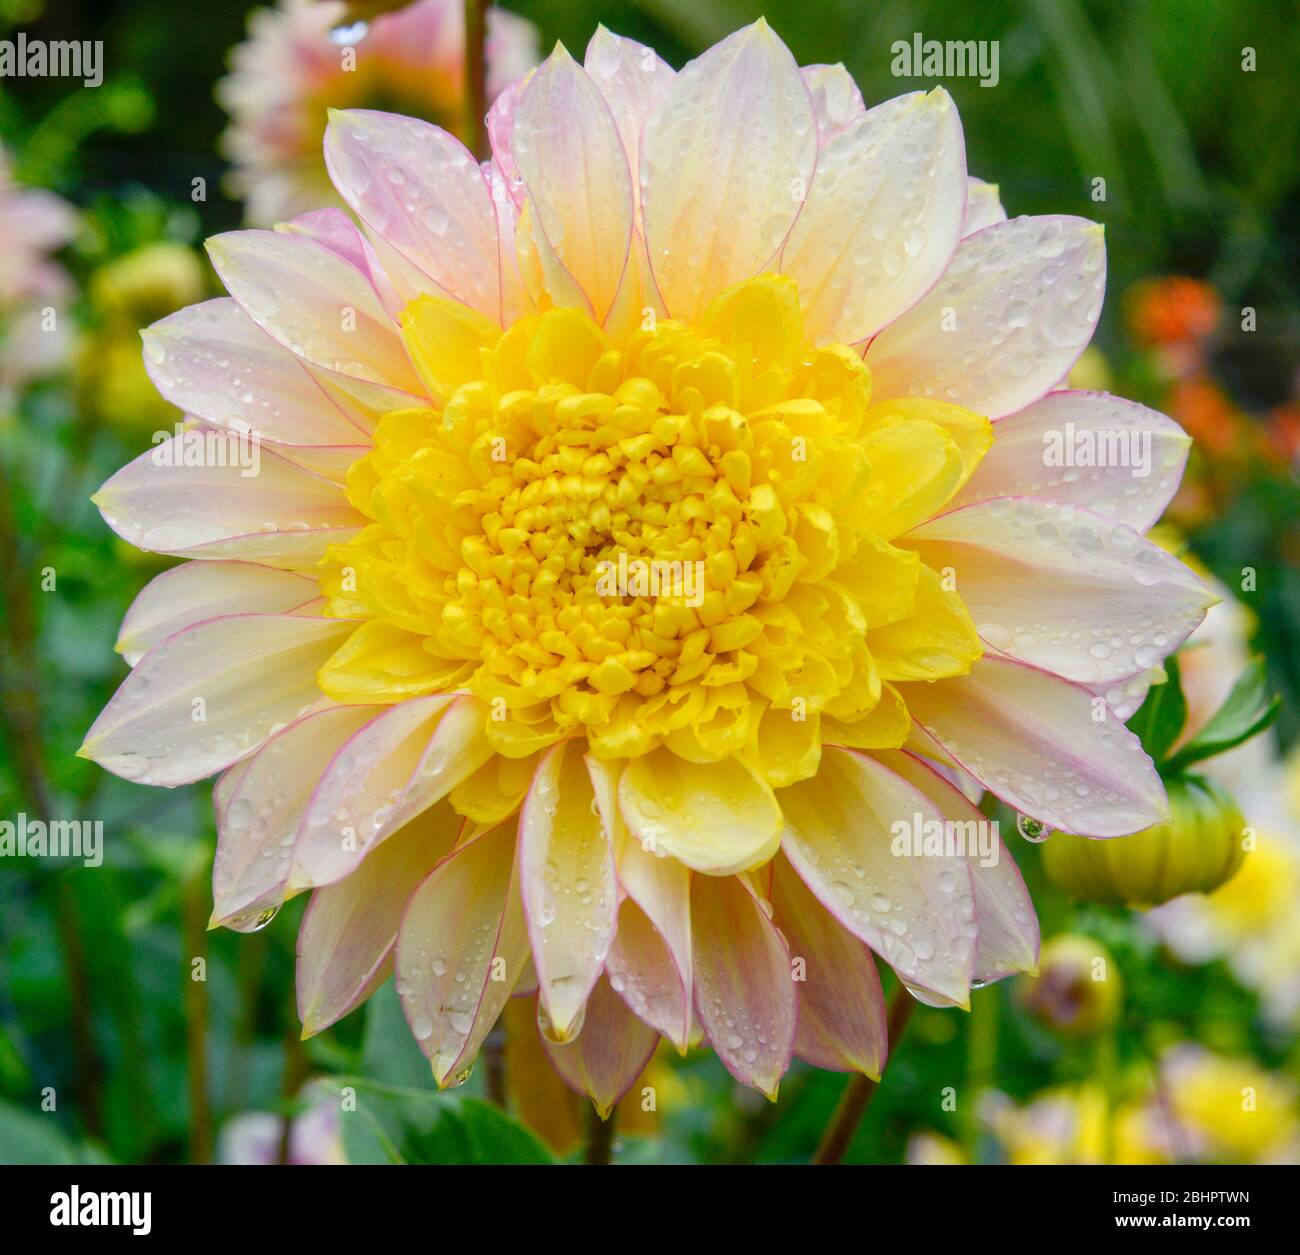 Close up of a single yellow and white Dahlia flower head with drops of water on the flower petals Stock Photo